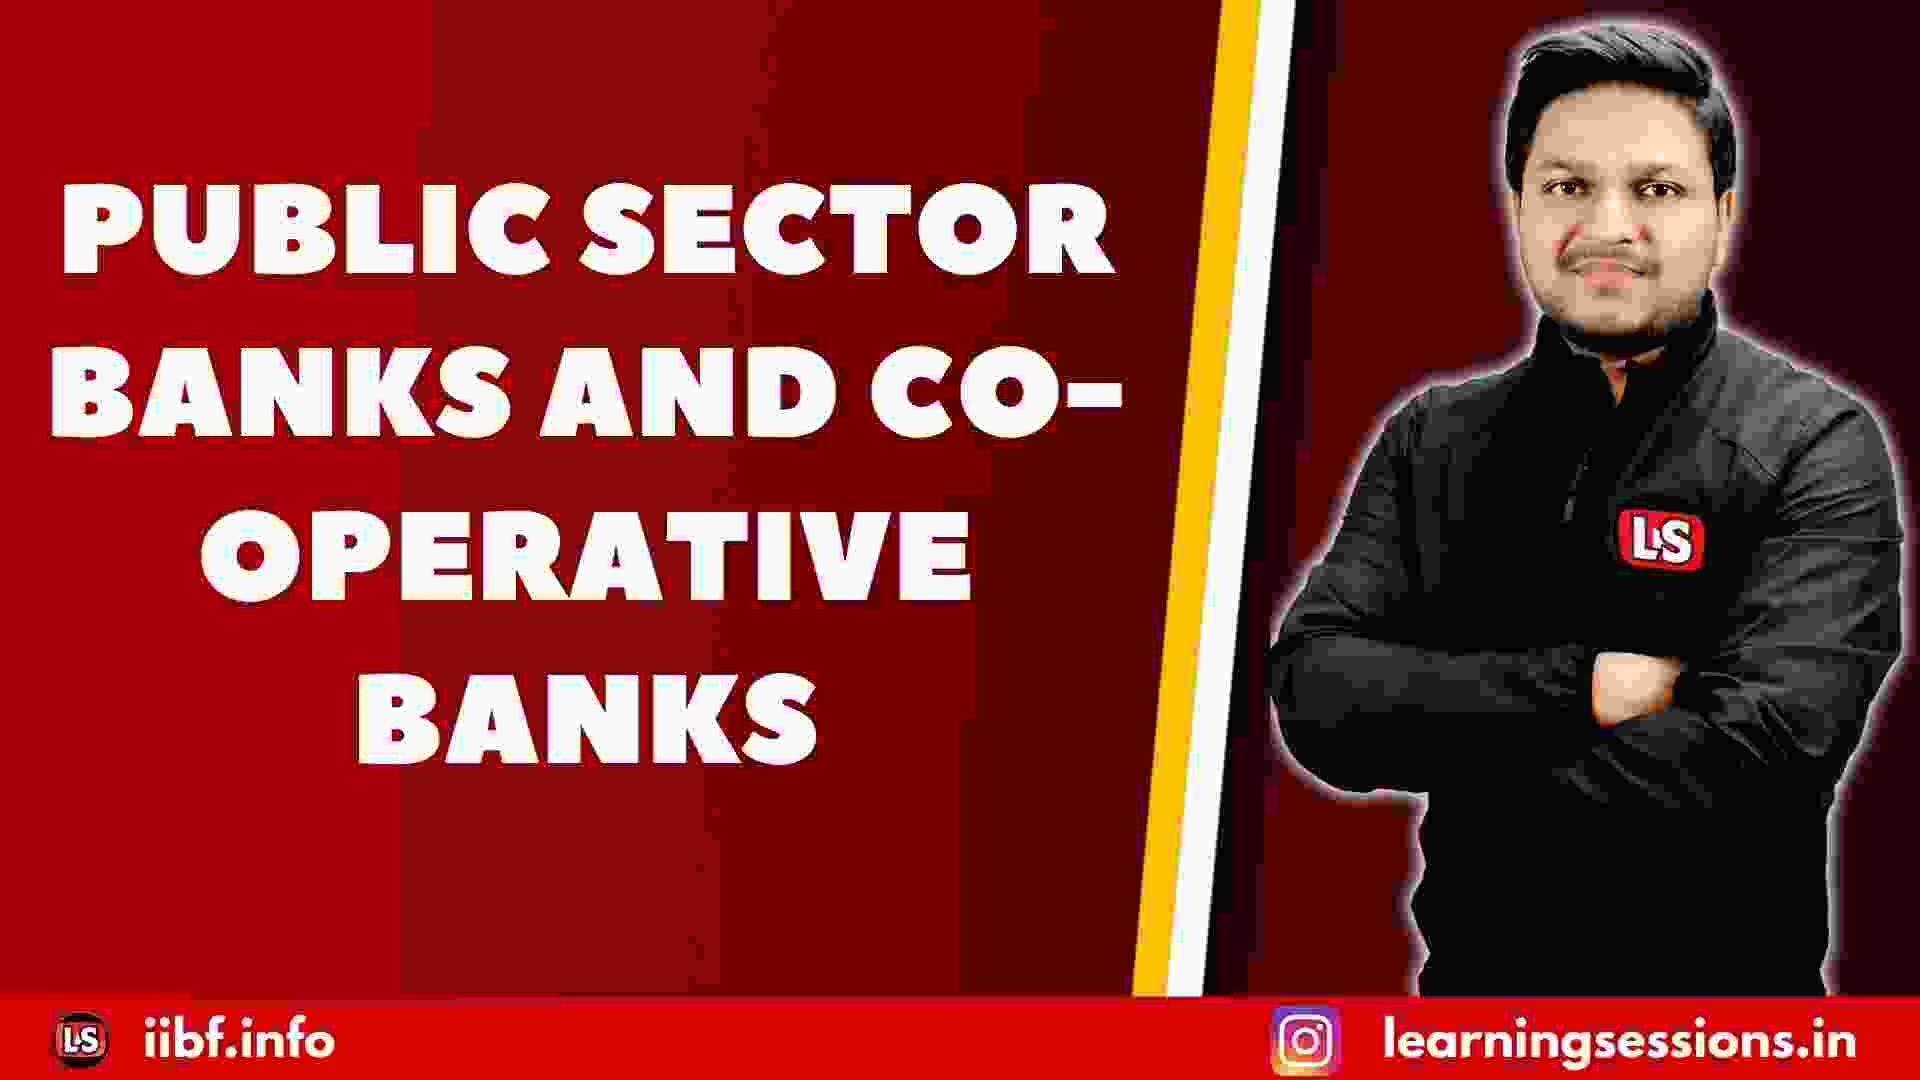 PUBLIC SECTOR BANKS AND CO-OPERATIVE BANKS